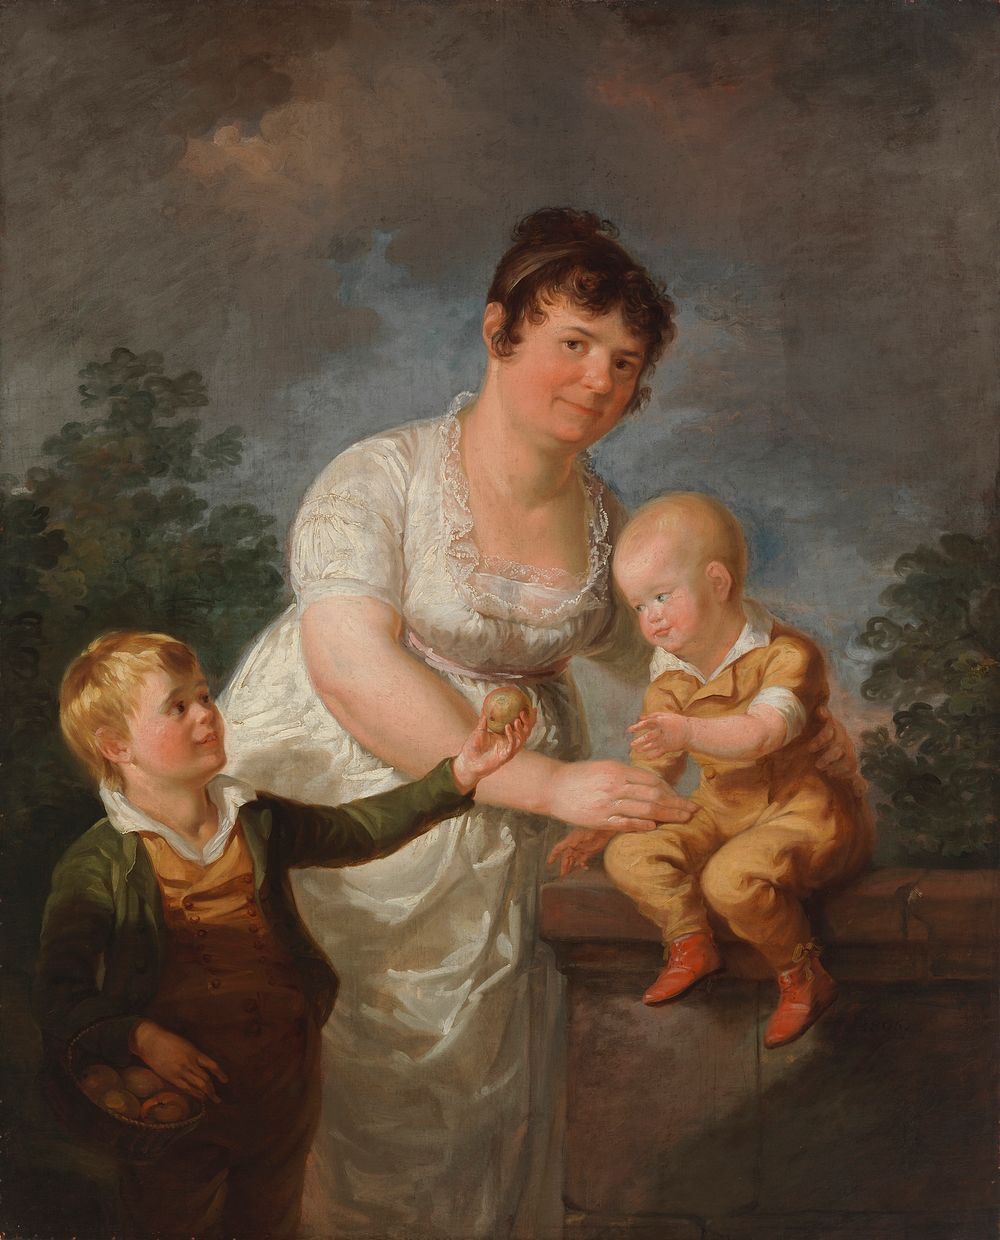 Mariana juliana laureus and her two sons, 1806, by Alexander Lauréus